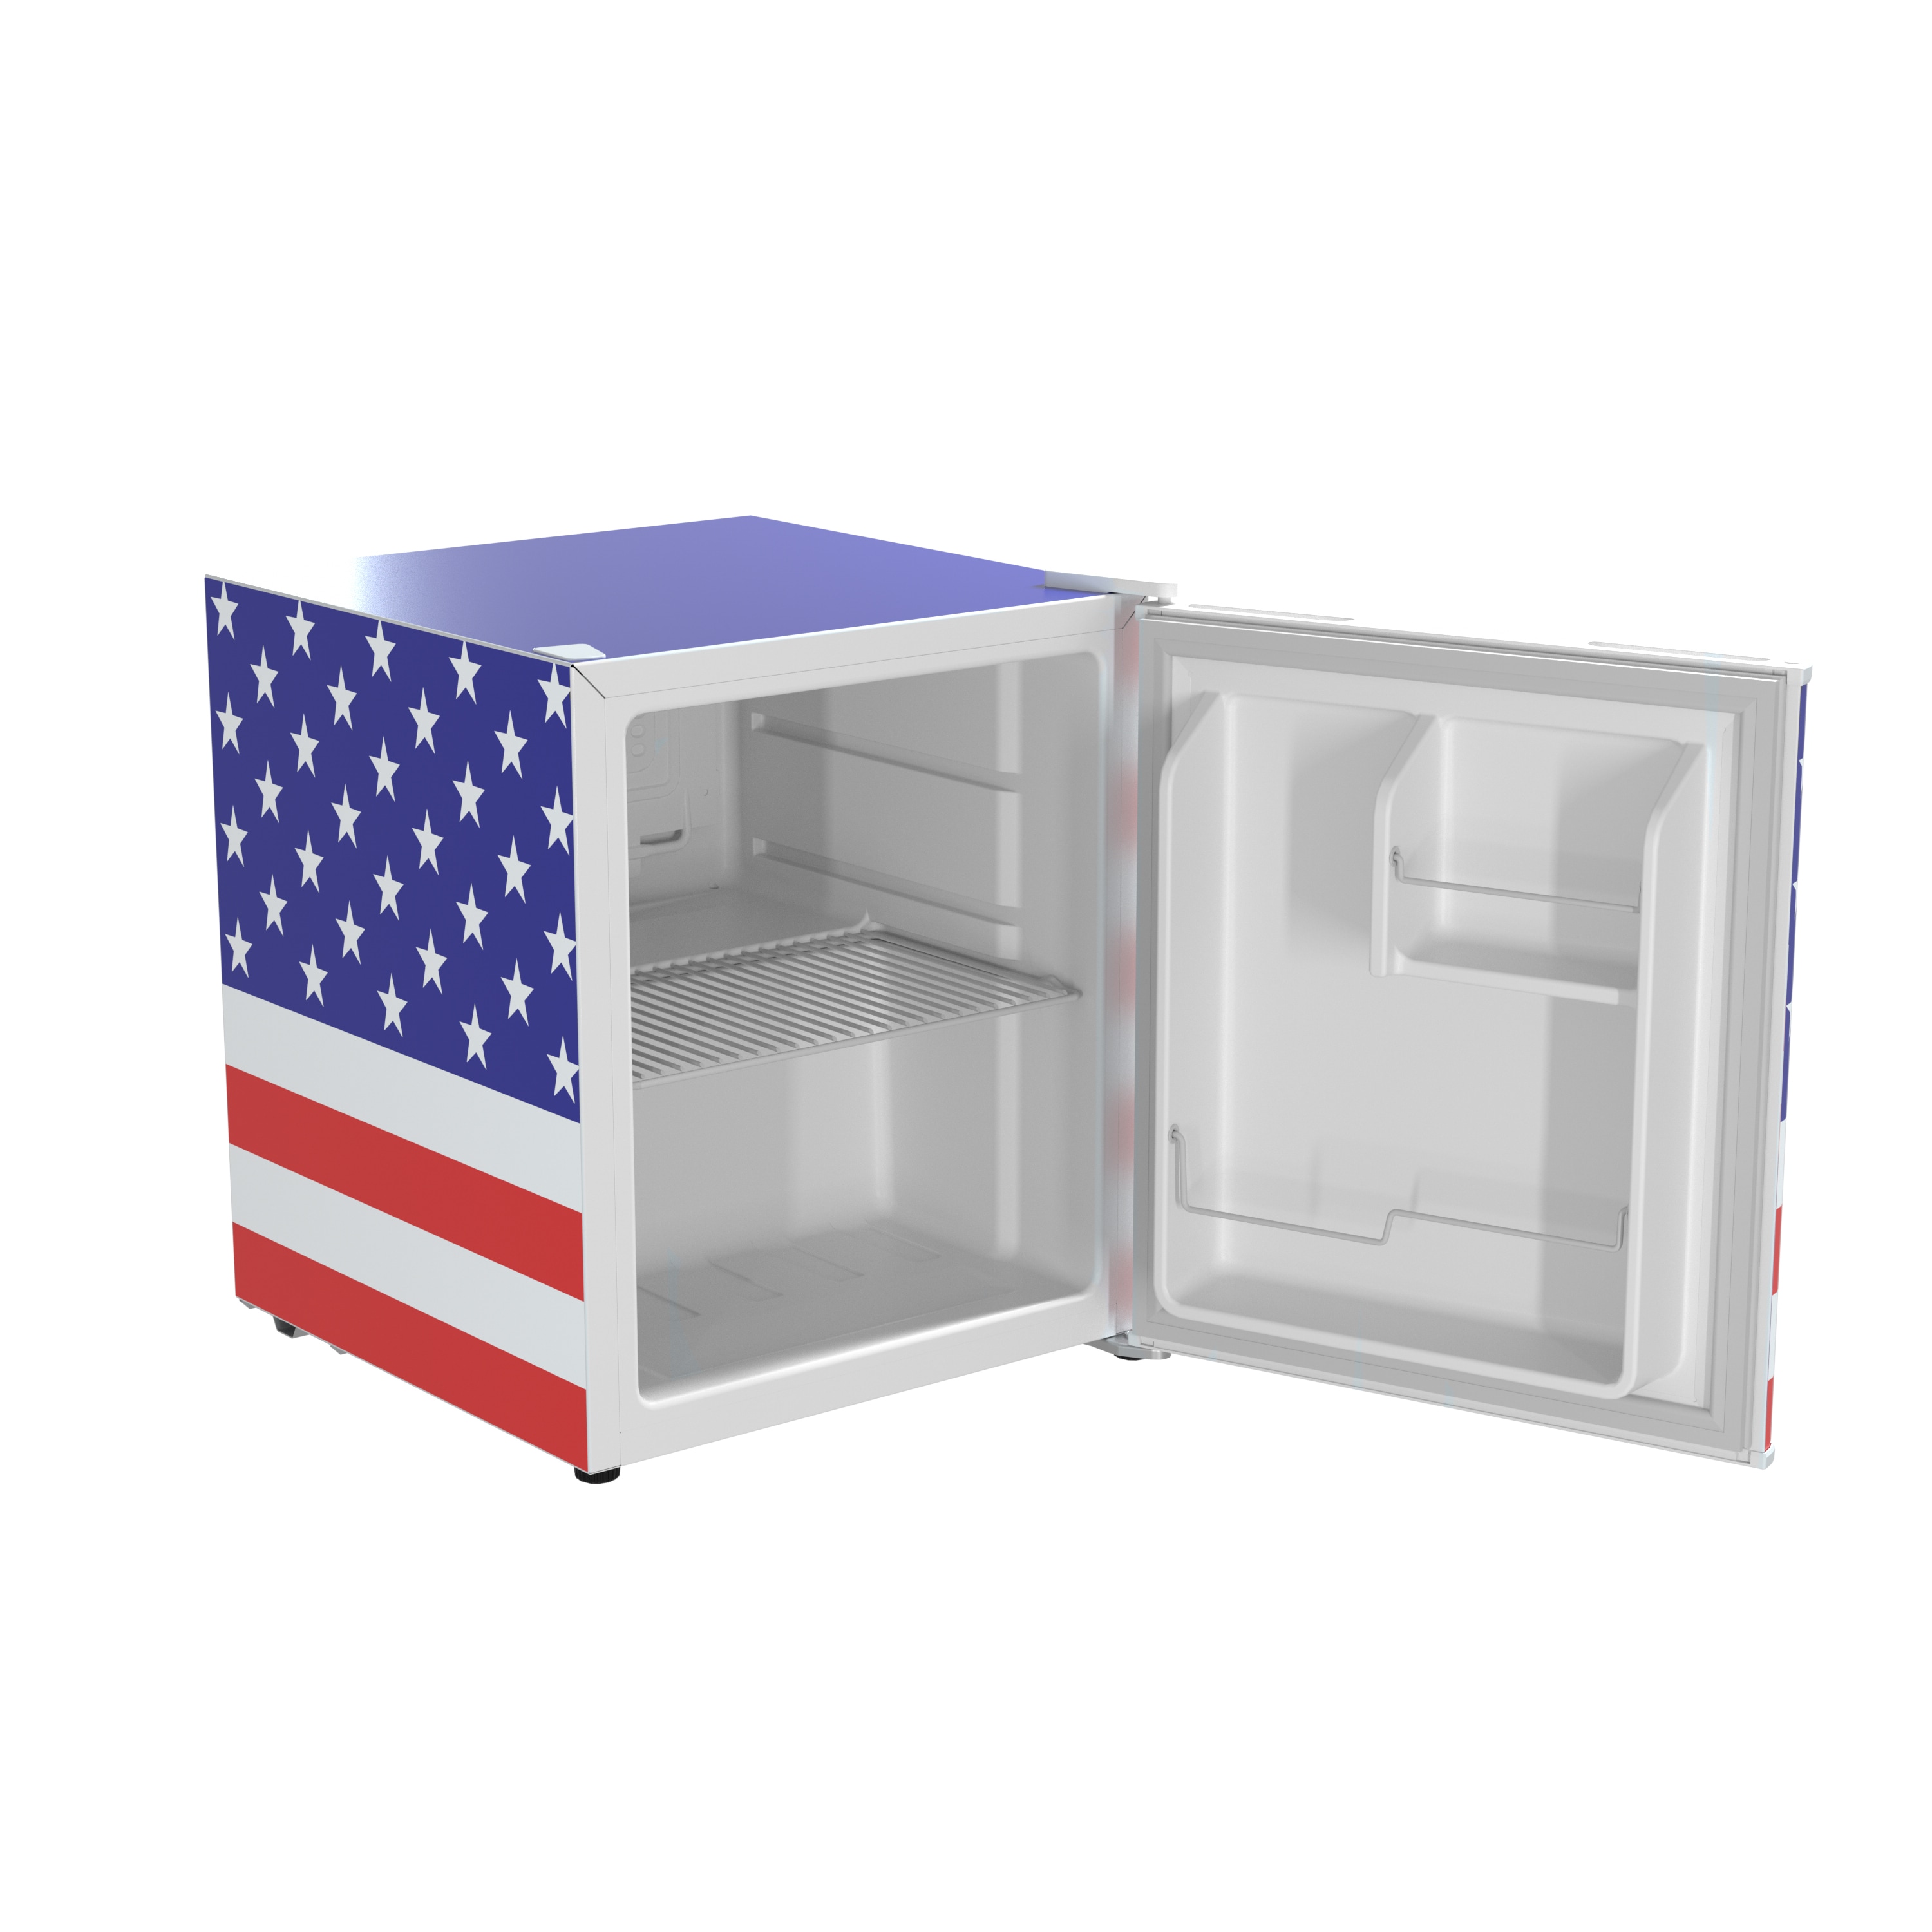 7 Cu Ft American Flag Fridge - Unique! for Sale in Roslyn Heights, NY -  OfferUp